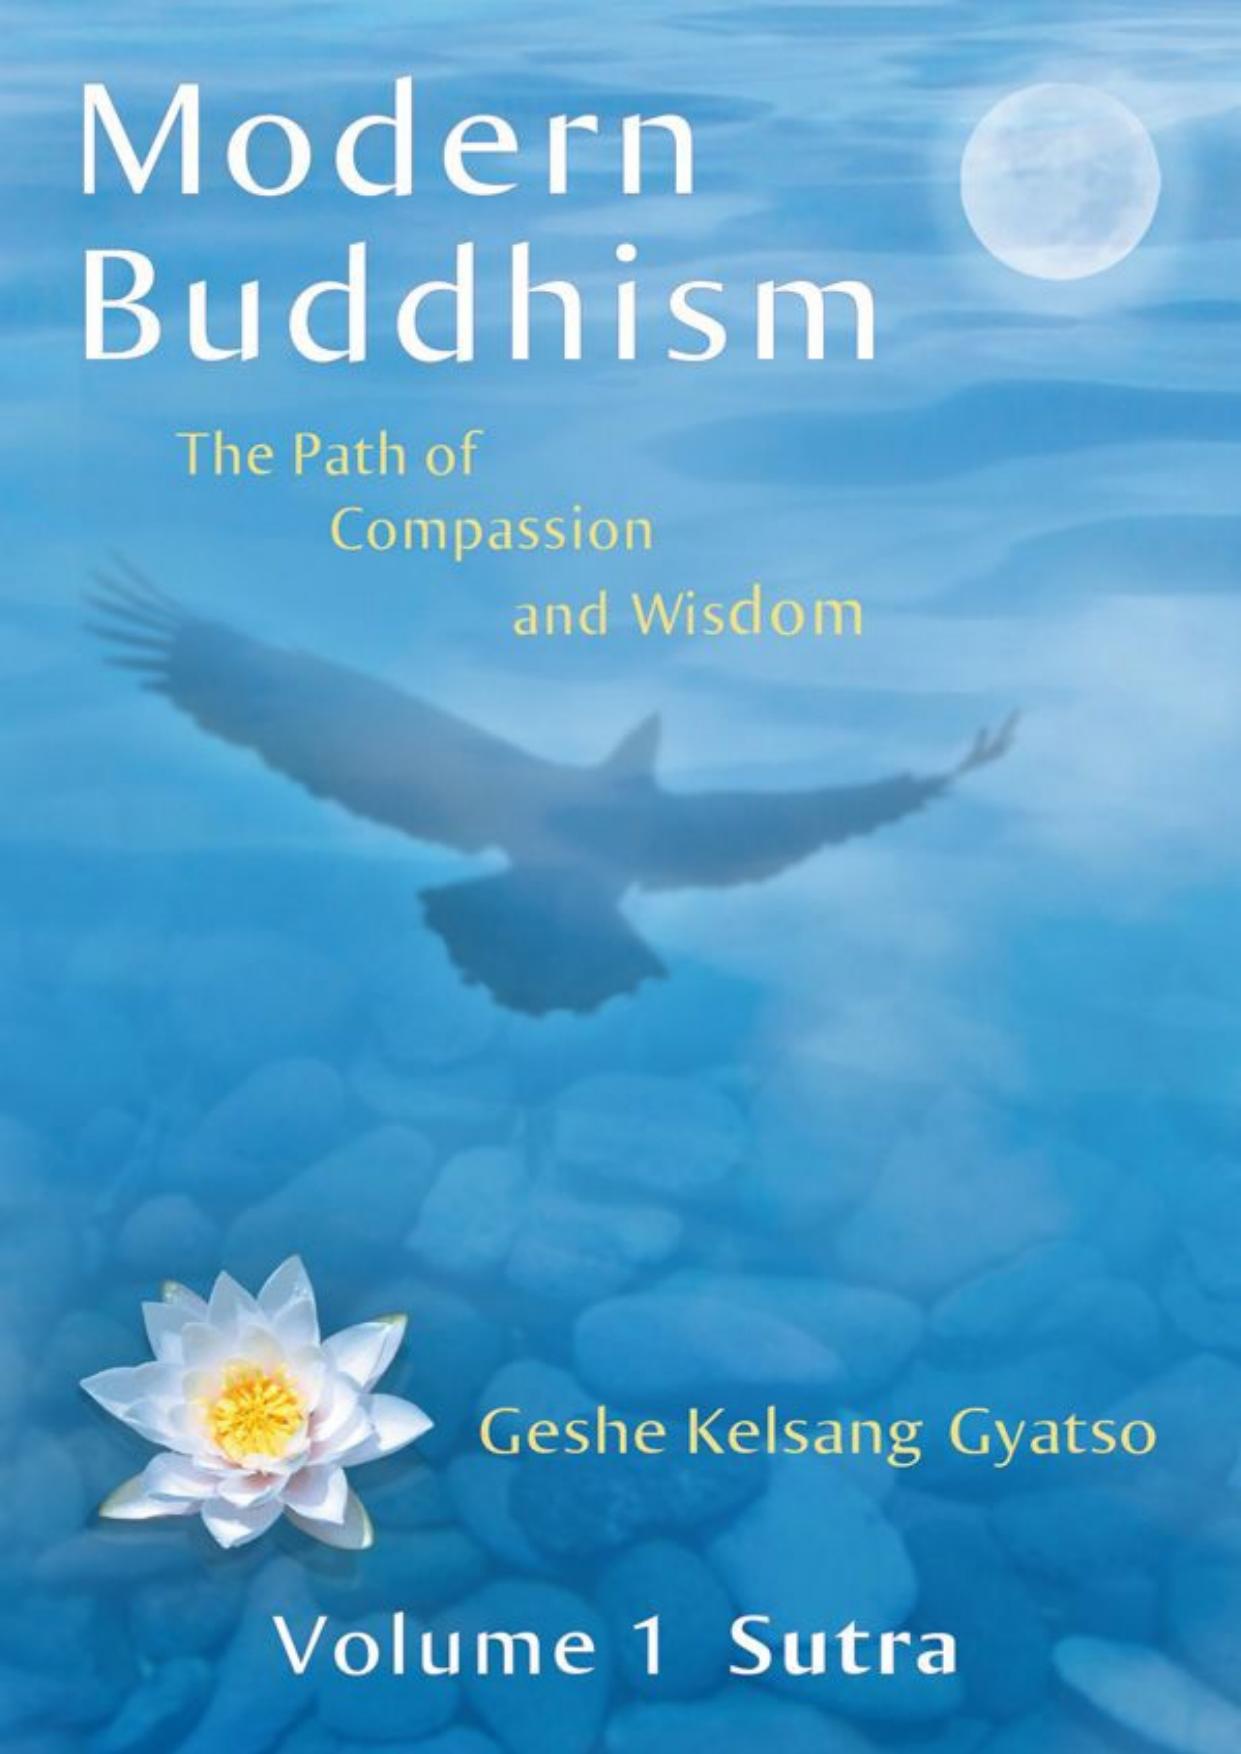 Modern Buddhism: The Path of Compassion and Wisdom - Volume 1 Sutra